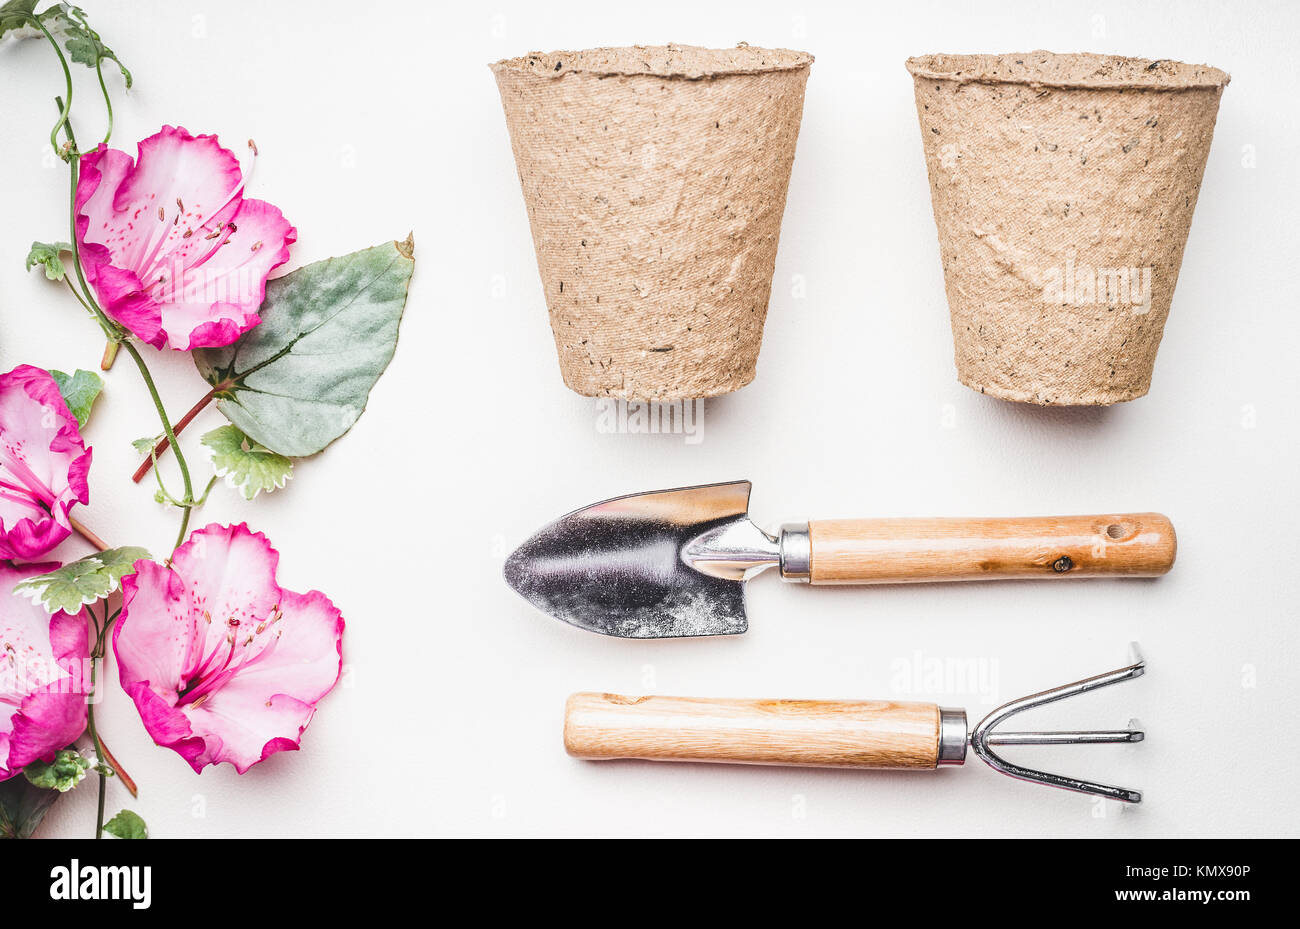 Gardening equipment  flat lay for planting and weeding, with garden tools, flowers plant , pot  on white table background, top view Stock Photo